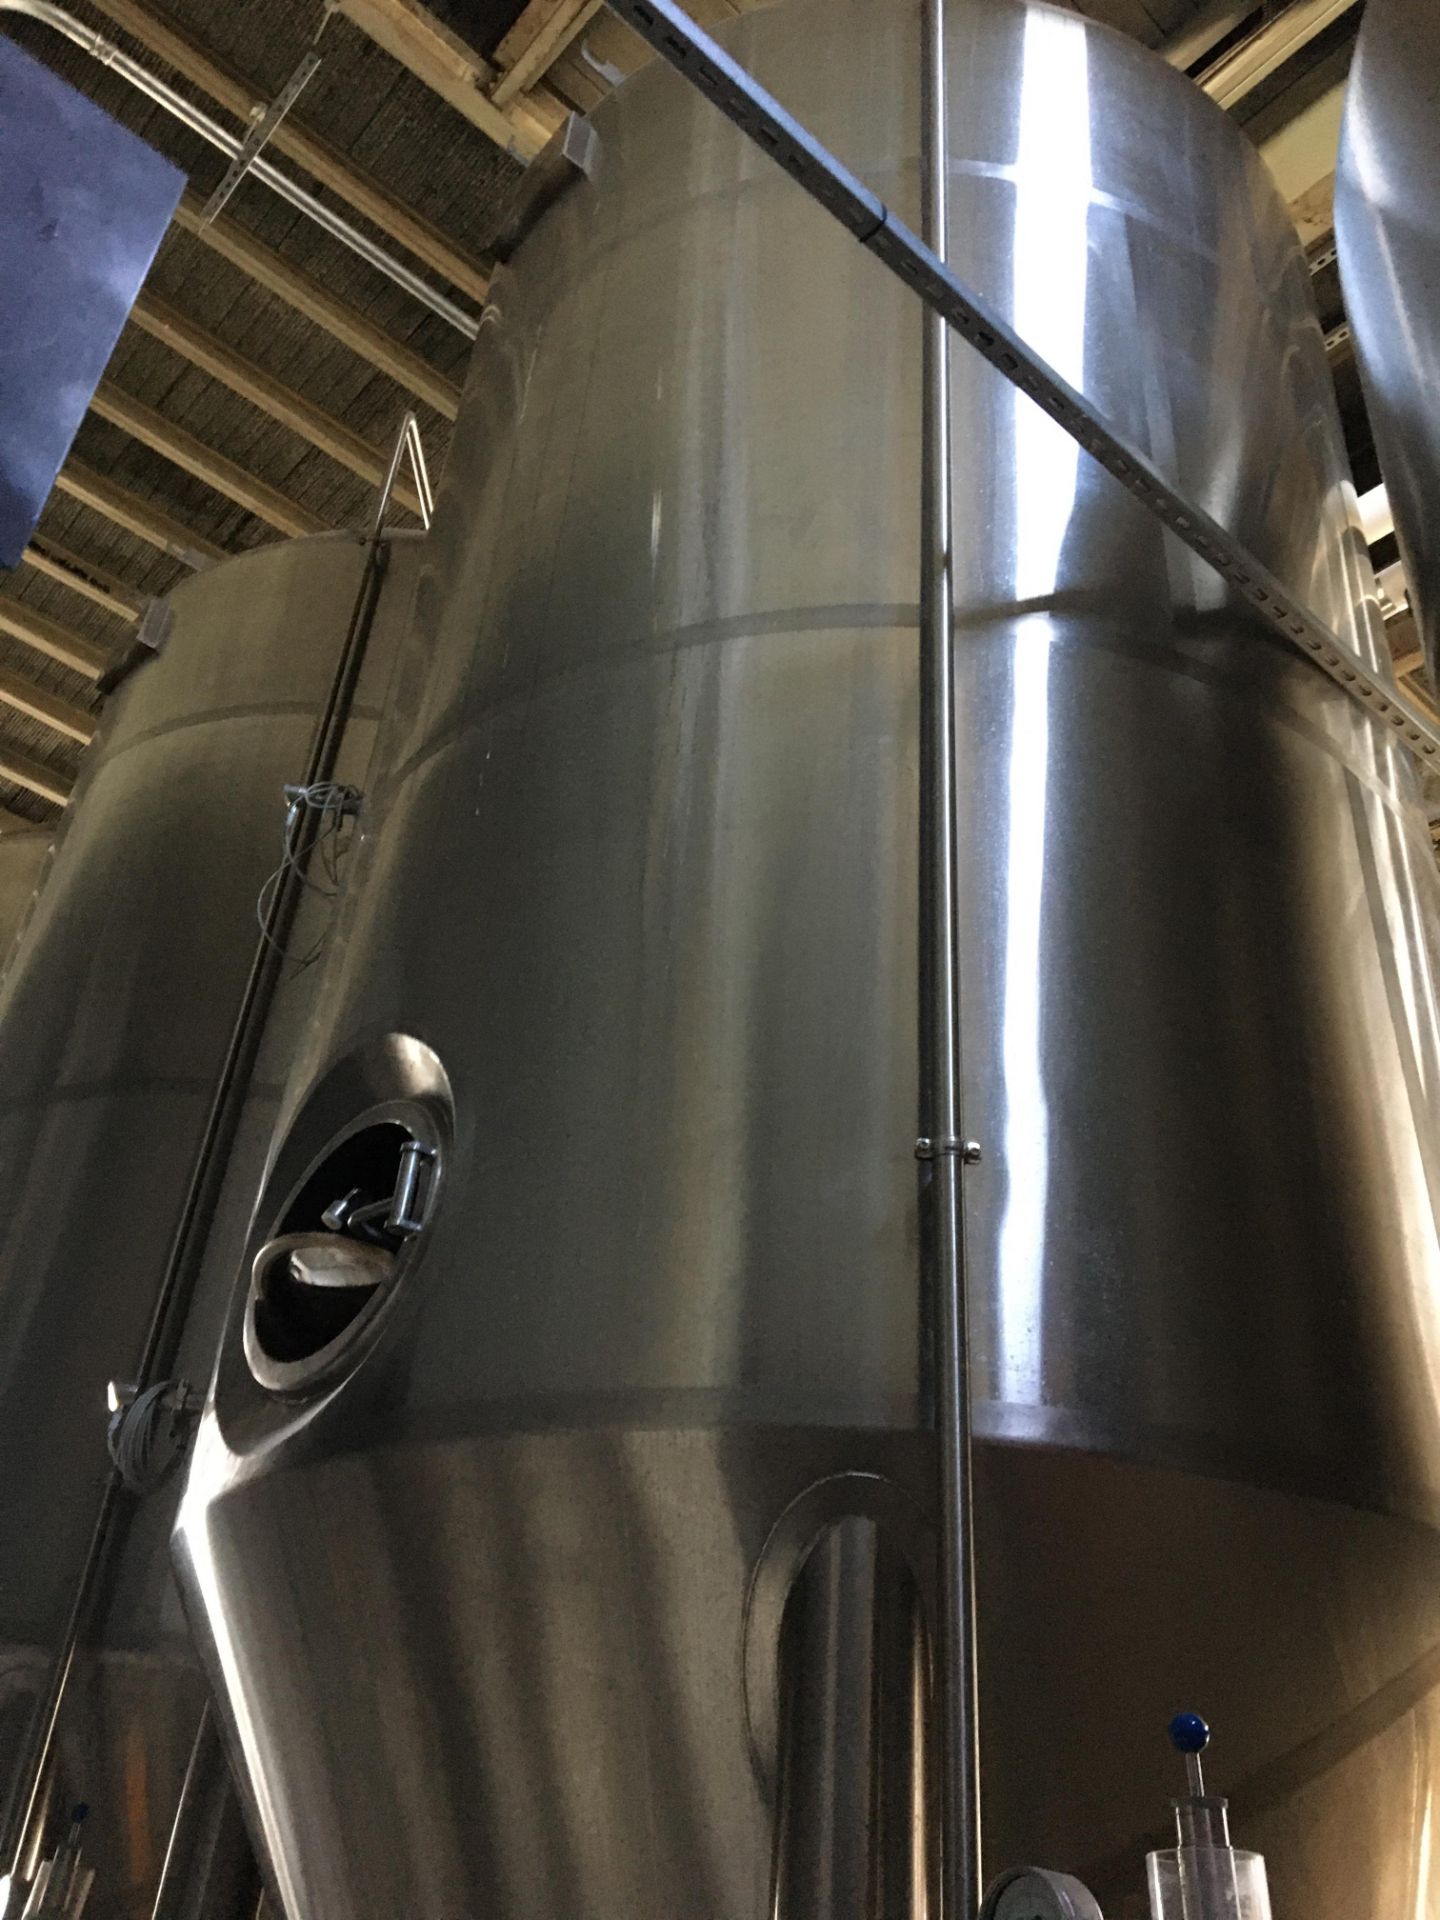 80-BBL Minnetonka Fermentation Tank, Model 80-BBL, Year 2017, Stainless Steel; Vessel store wort and - Image 6 of 14